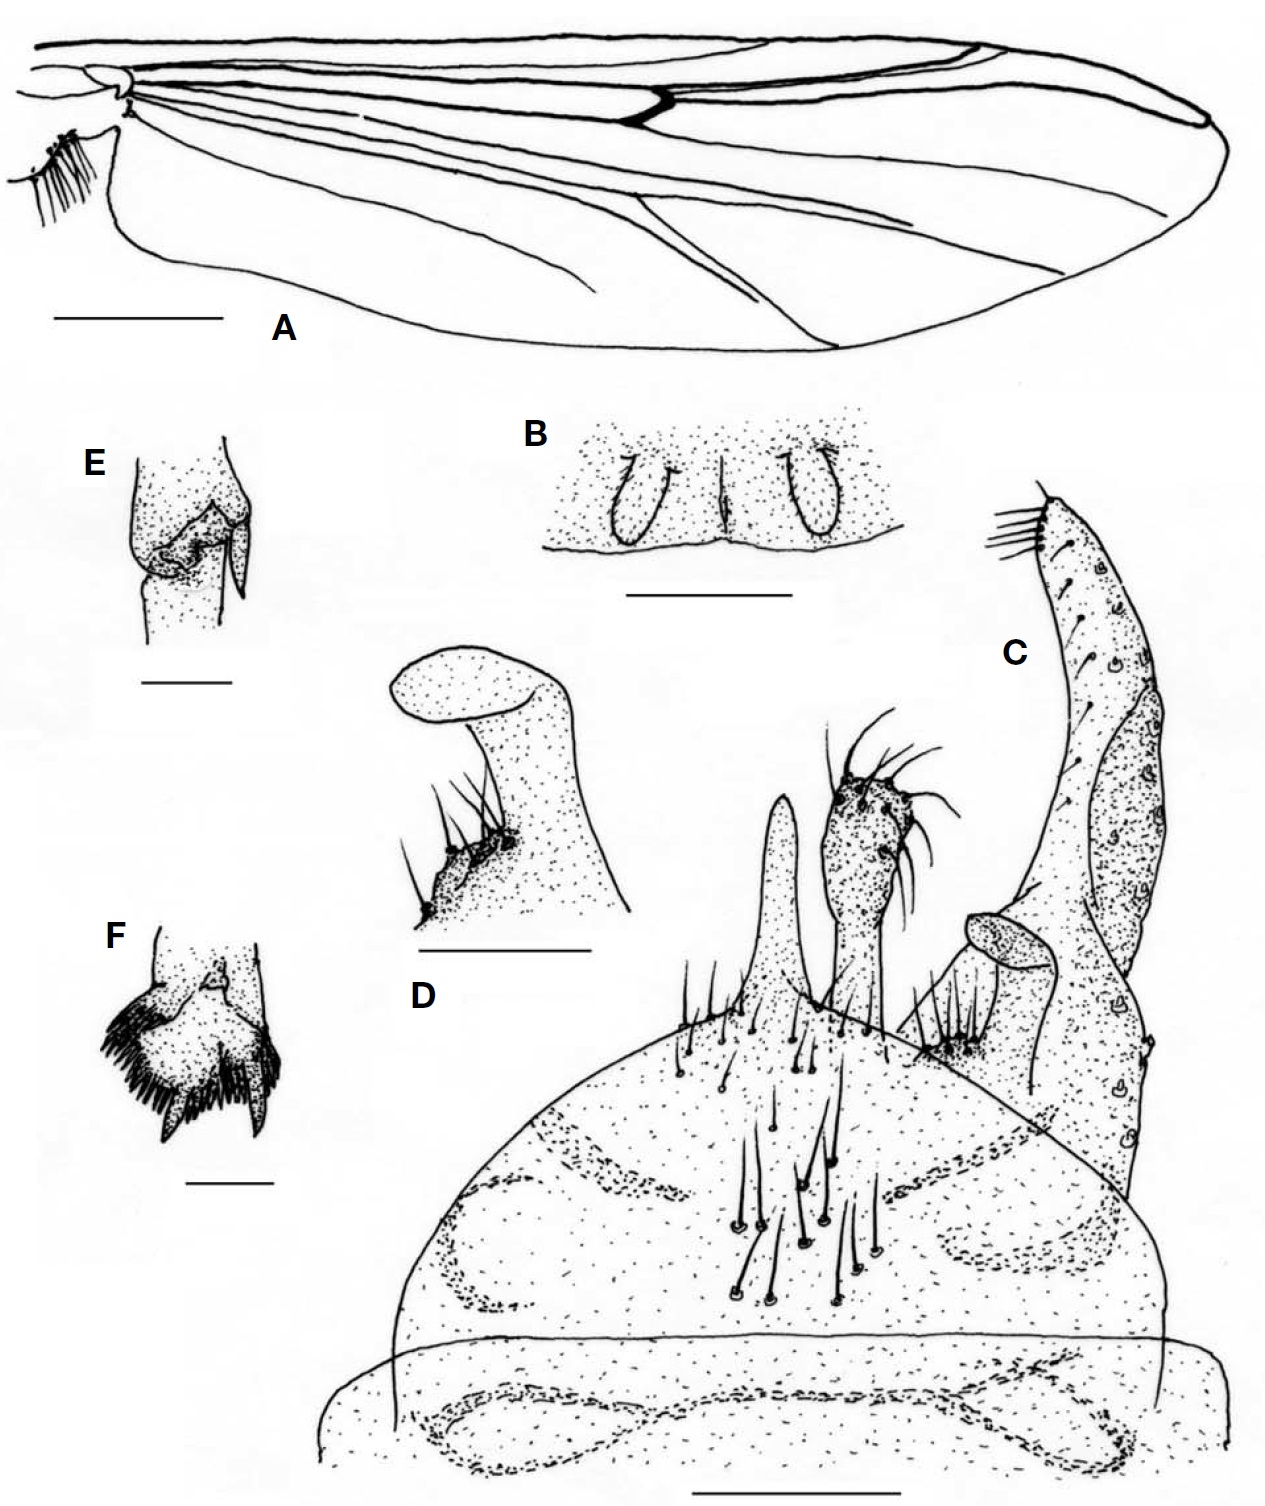 Chironomus jangchungensis sp. nov. (male). A, Wing; B, Frontal tubercle; C, Hypopygium; D, Superior volsella; E, Apical
spur of fore tibia; F, Comb scales of hind tibia. Scale bars: A=0.5 mm, B, D-F=0.05 μm, C=0.1 μm.